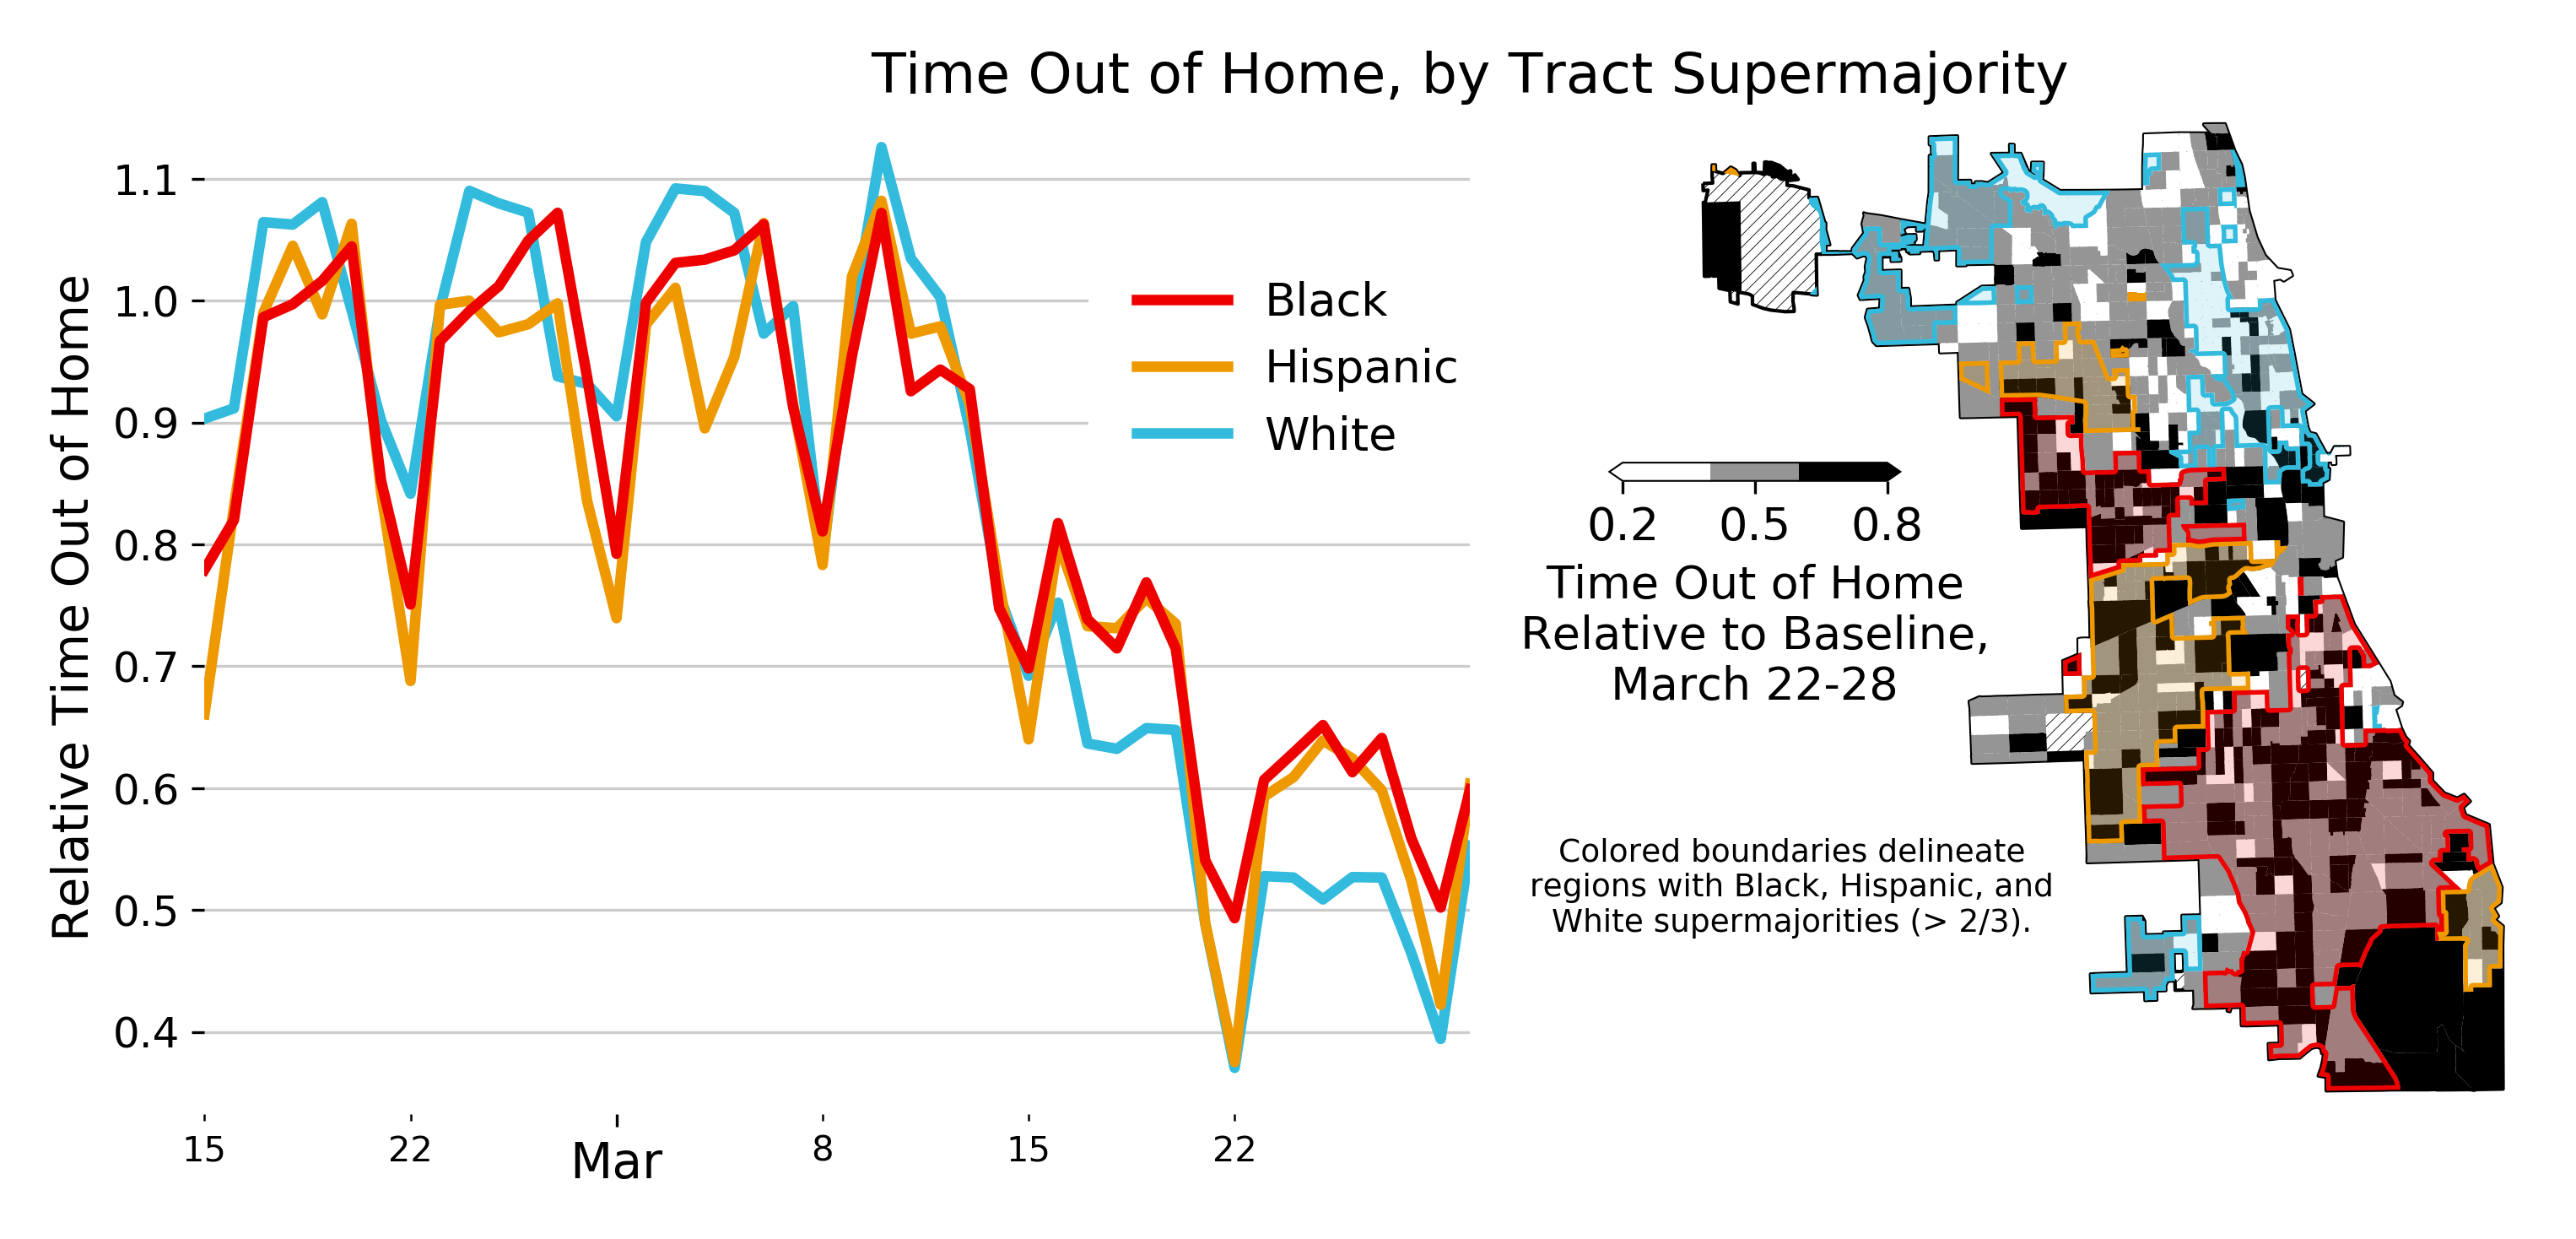 Neighborhood-level activity out of home in Chicago, grouped by racial and ethnic composition.